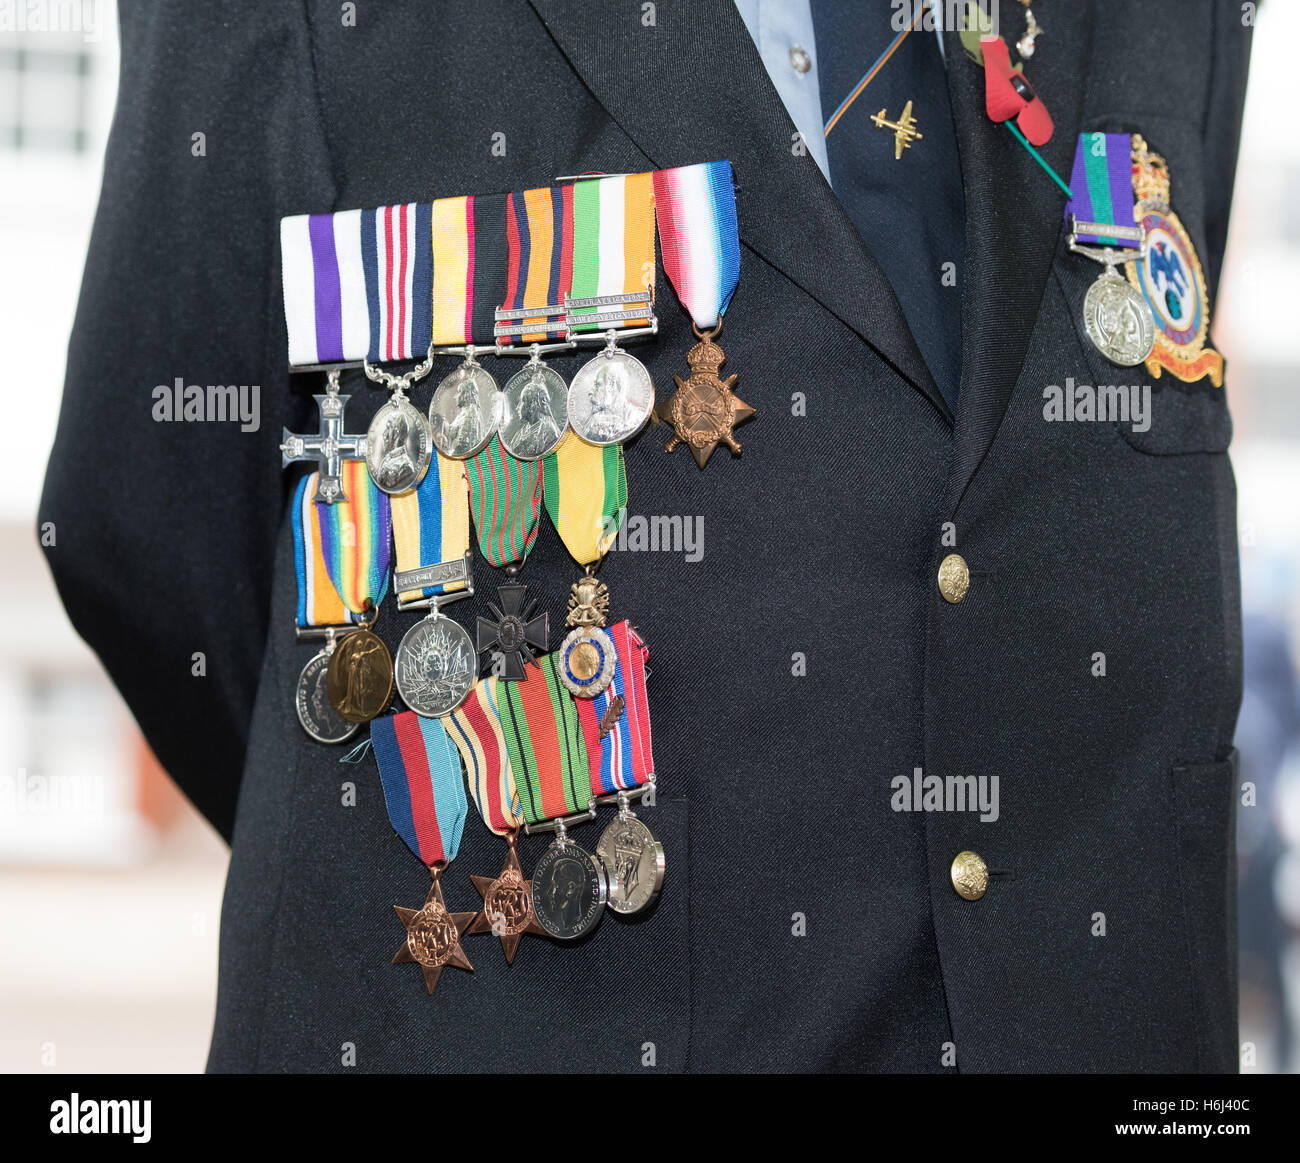 British military medals High Resolution Stock Photography and Images ...